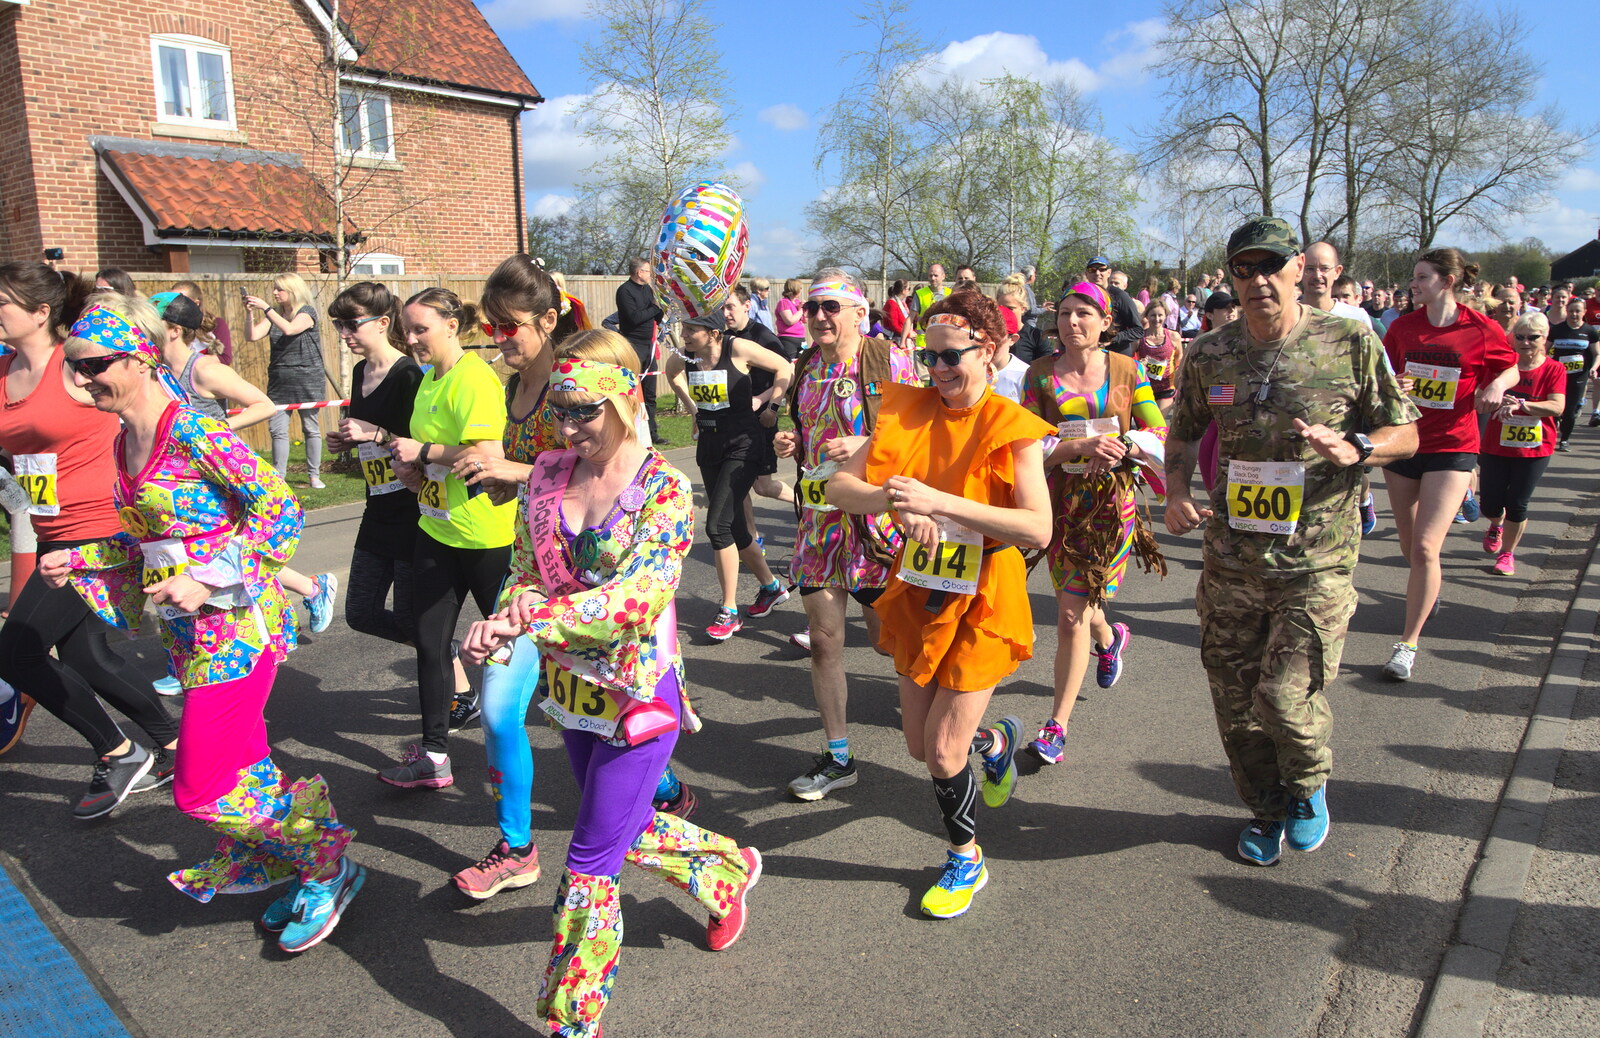 The hippies are off from The Black Dog Festival of Running, Bungay, Suffolk - 2nd April 2017